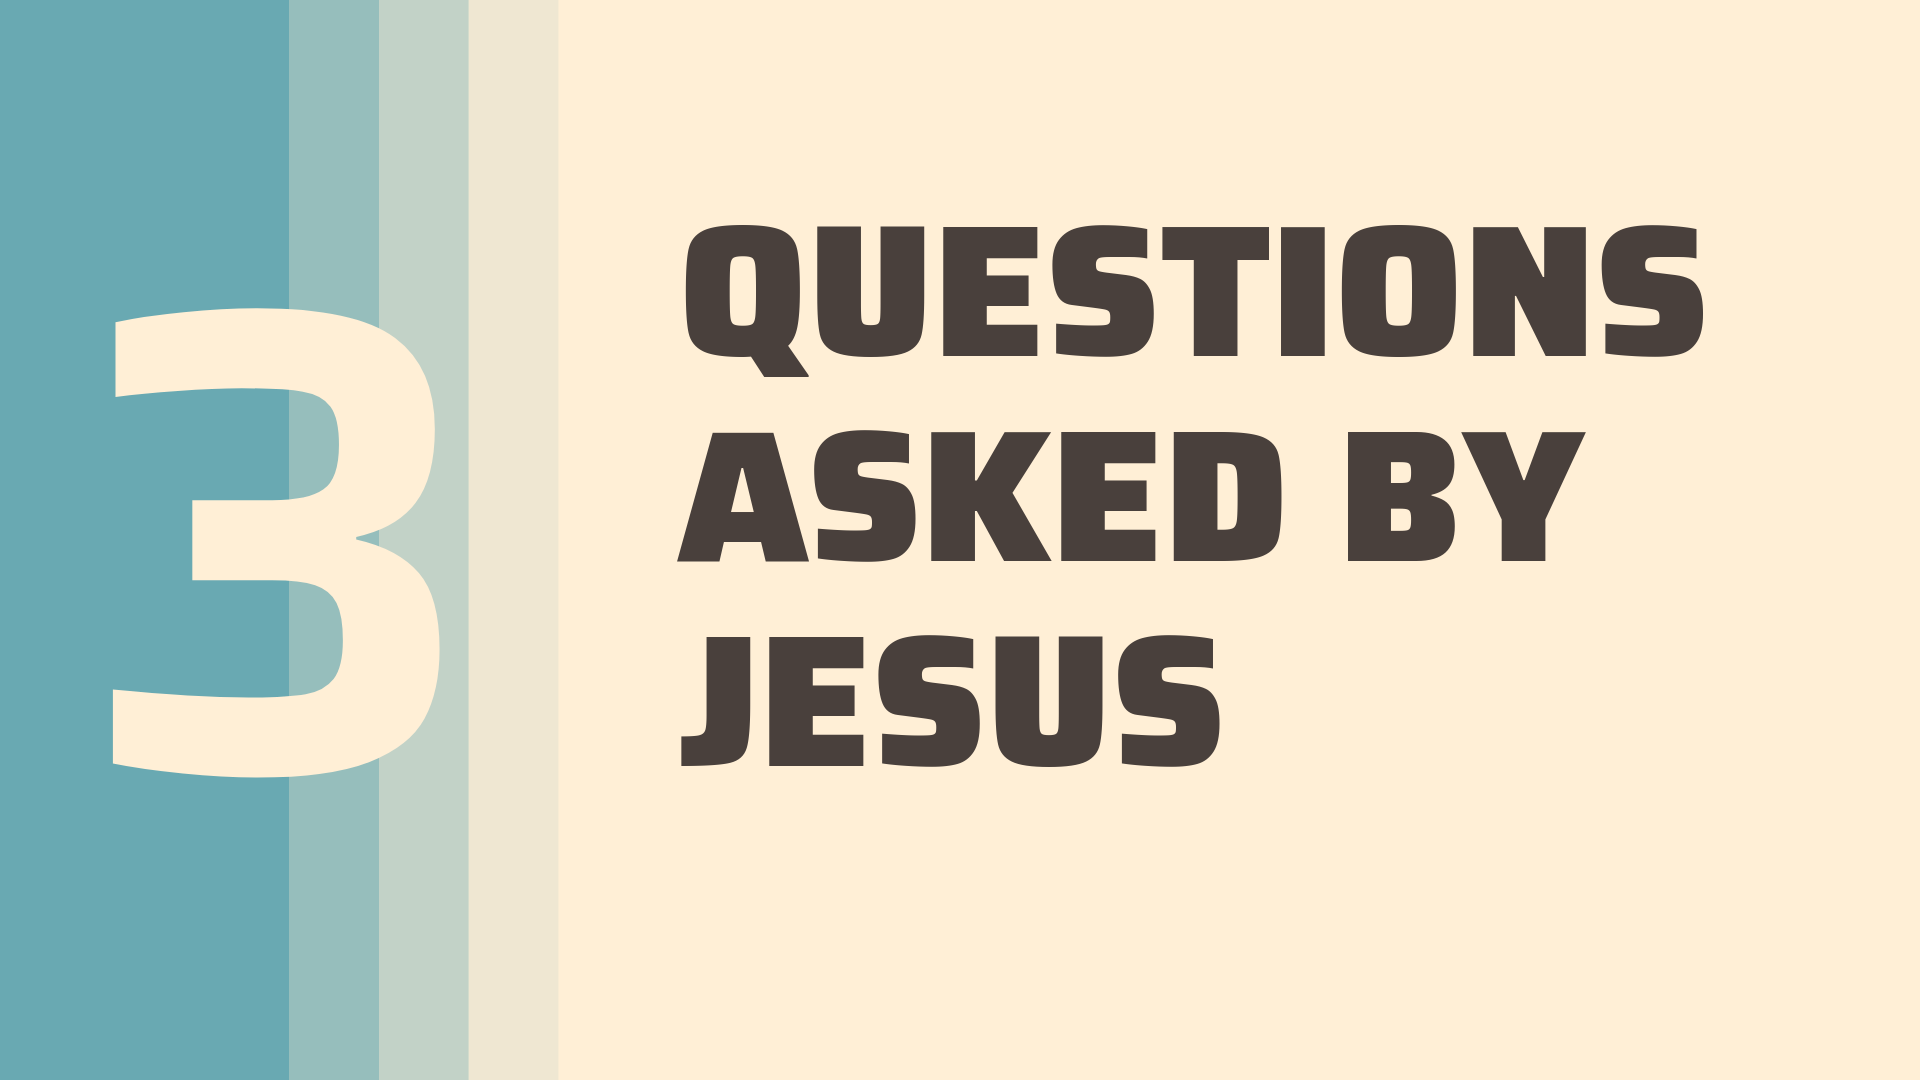 South Franklin church of Christ - Three questions asked by Jesus